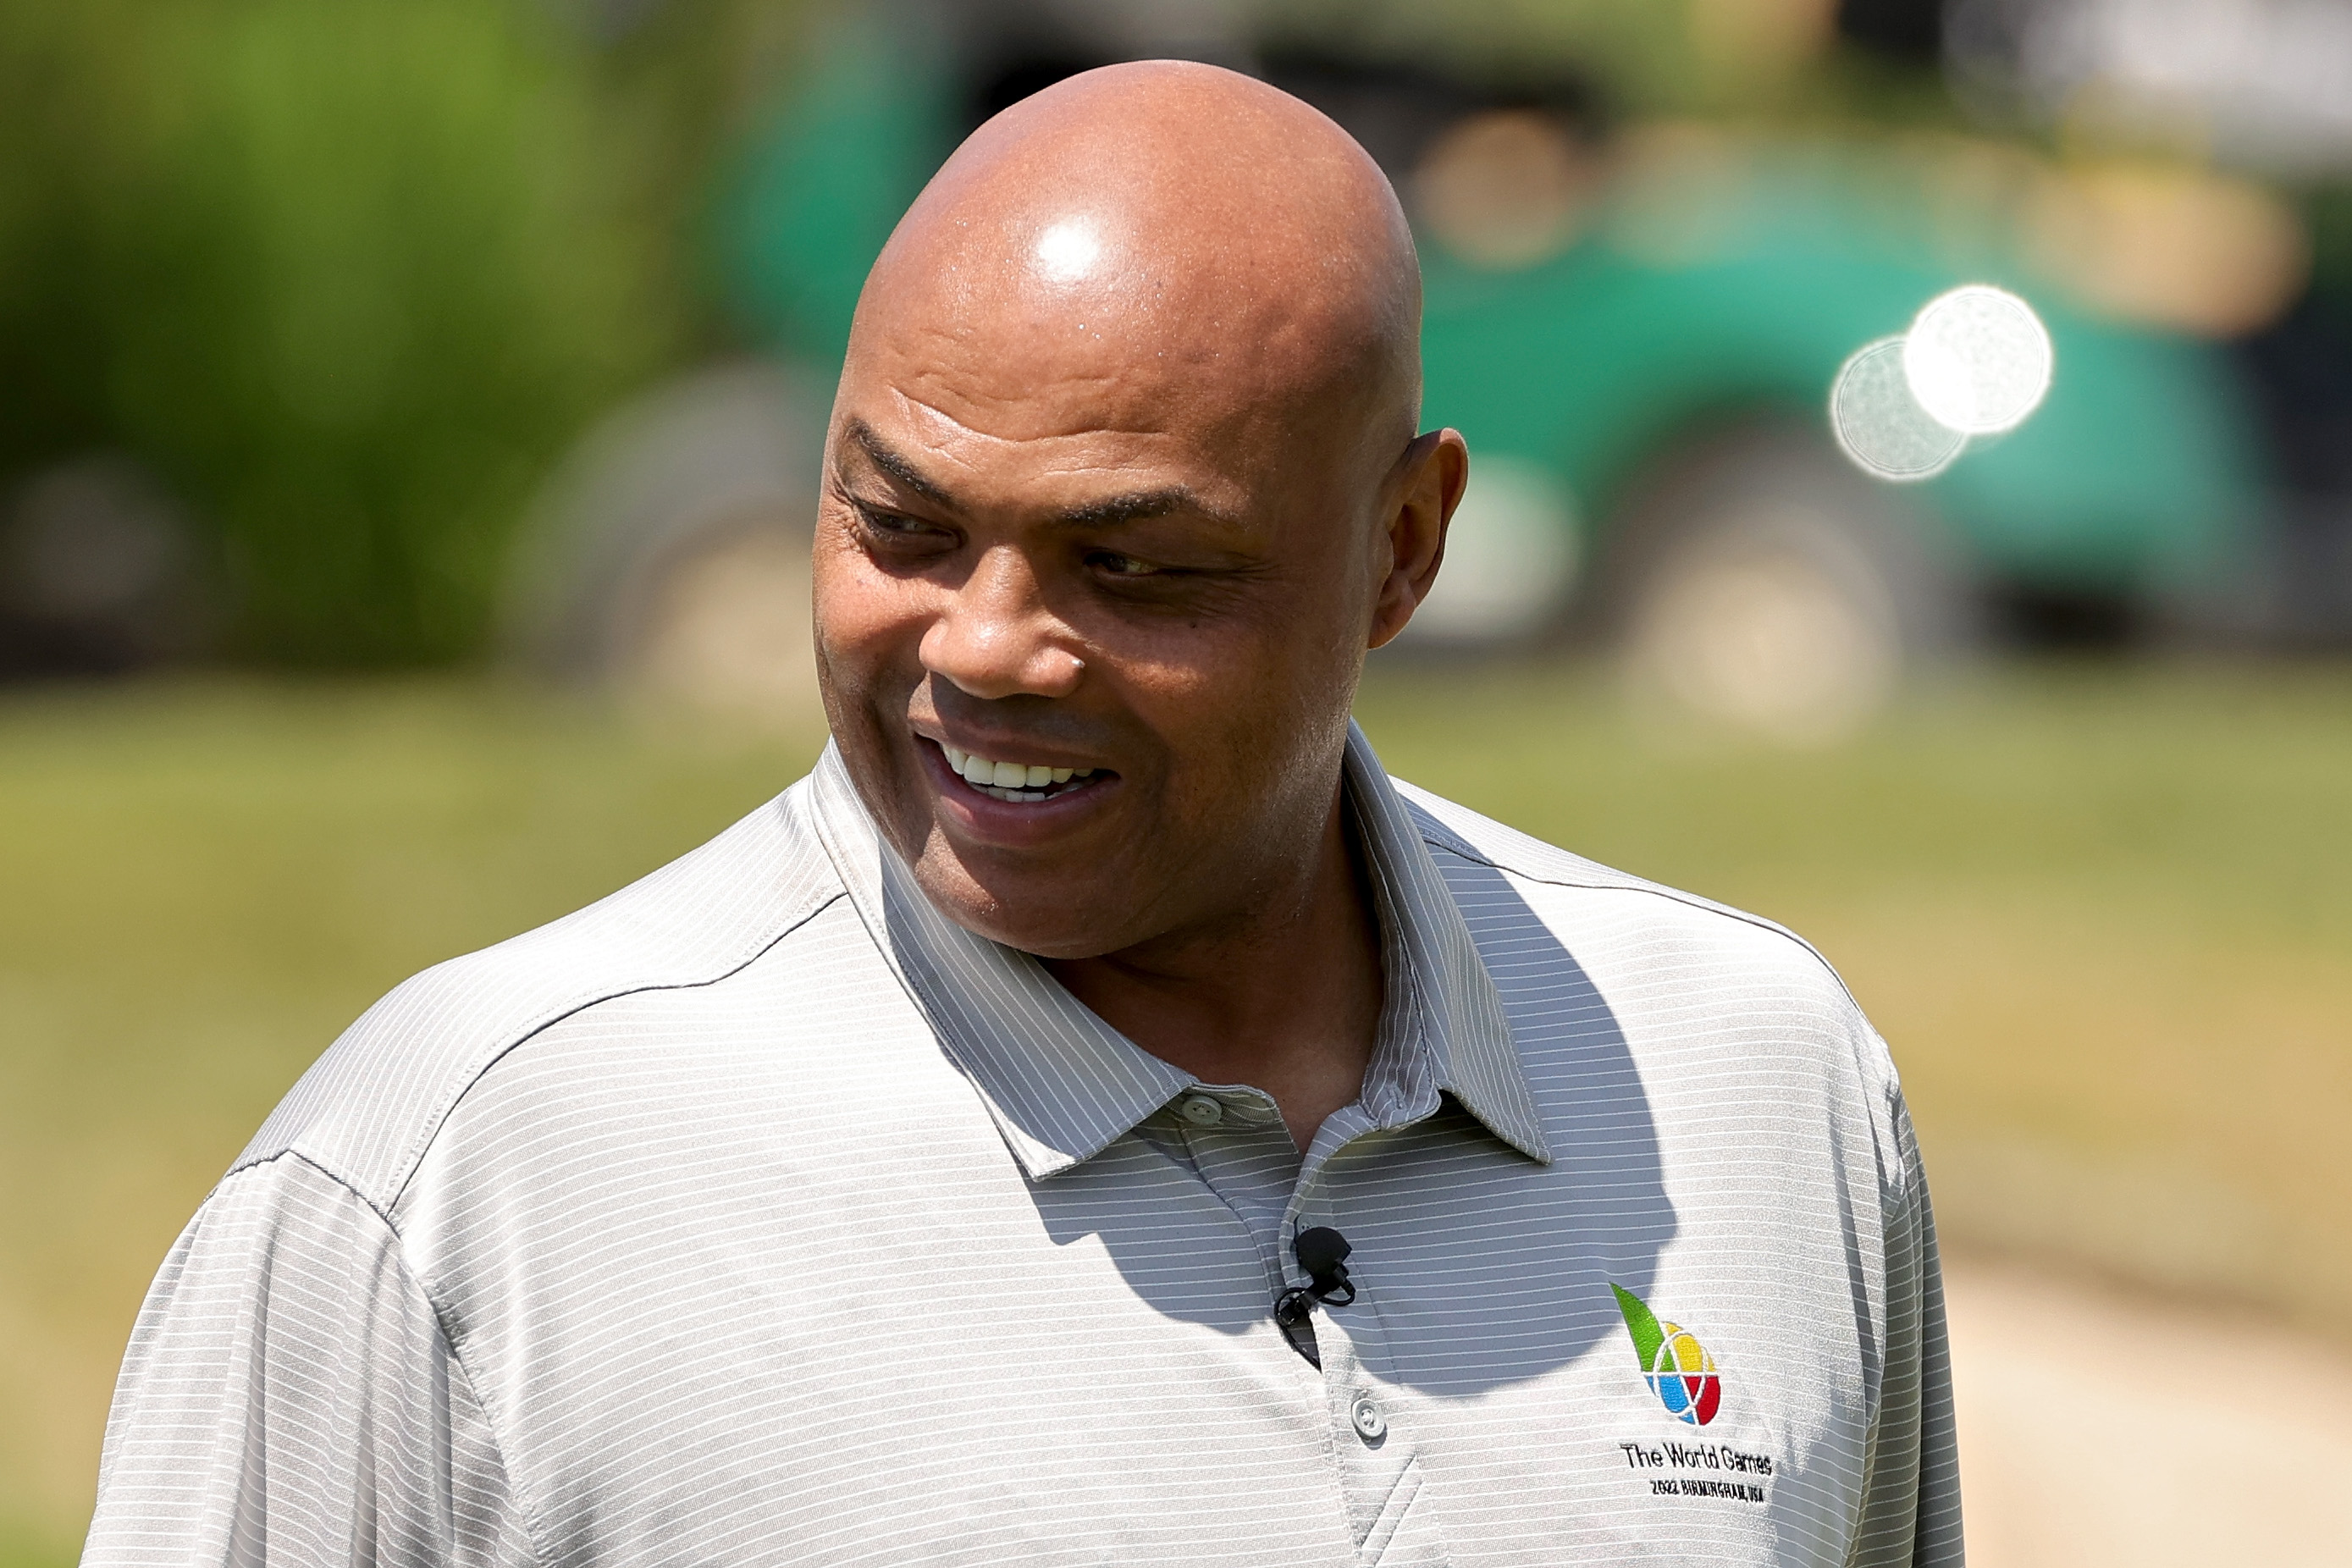 Charles Barkley prepares for Capital One's "The Match"